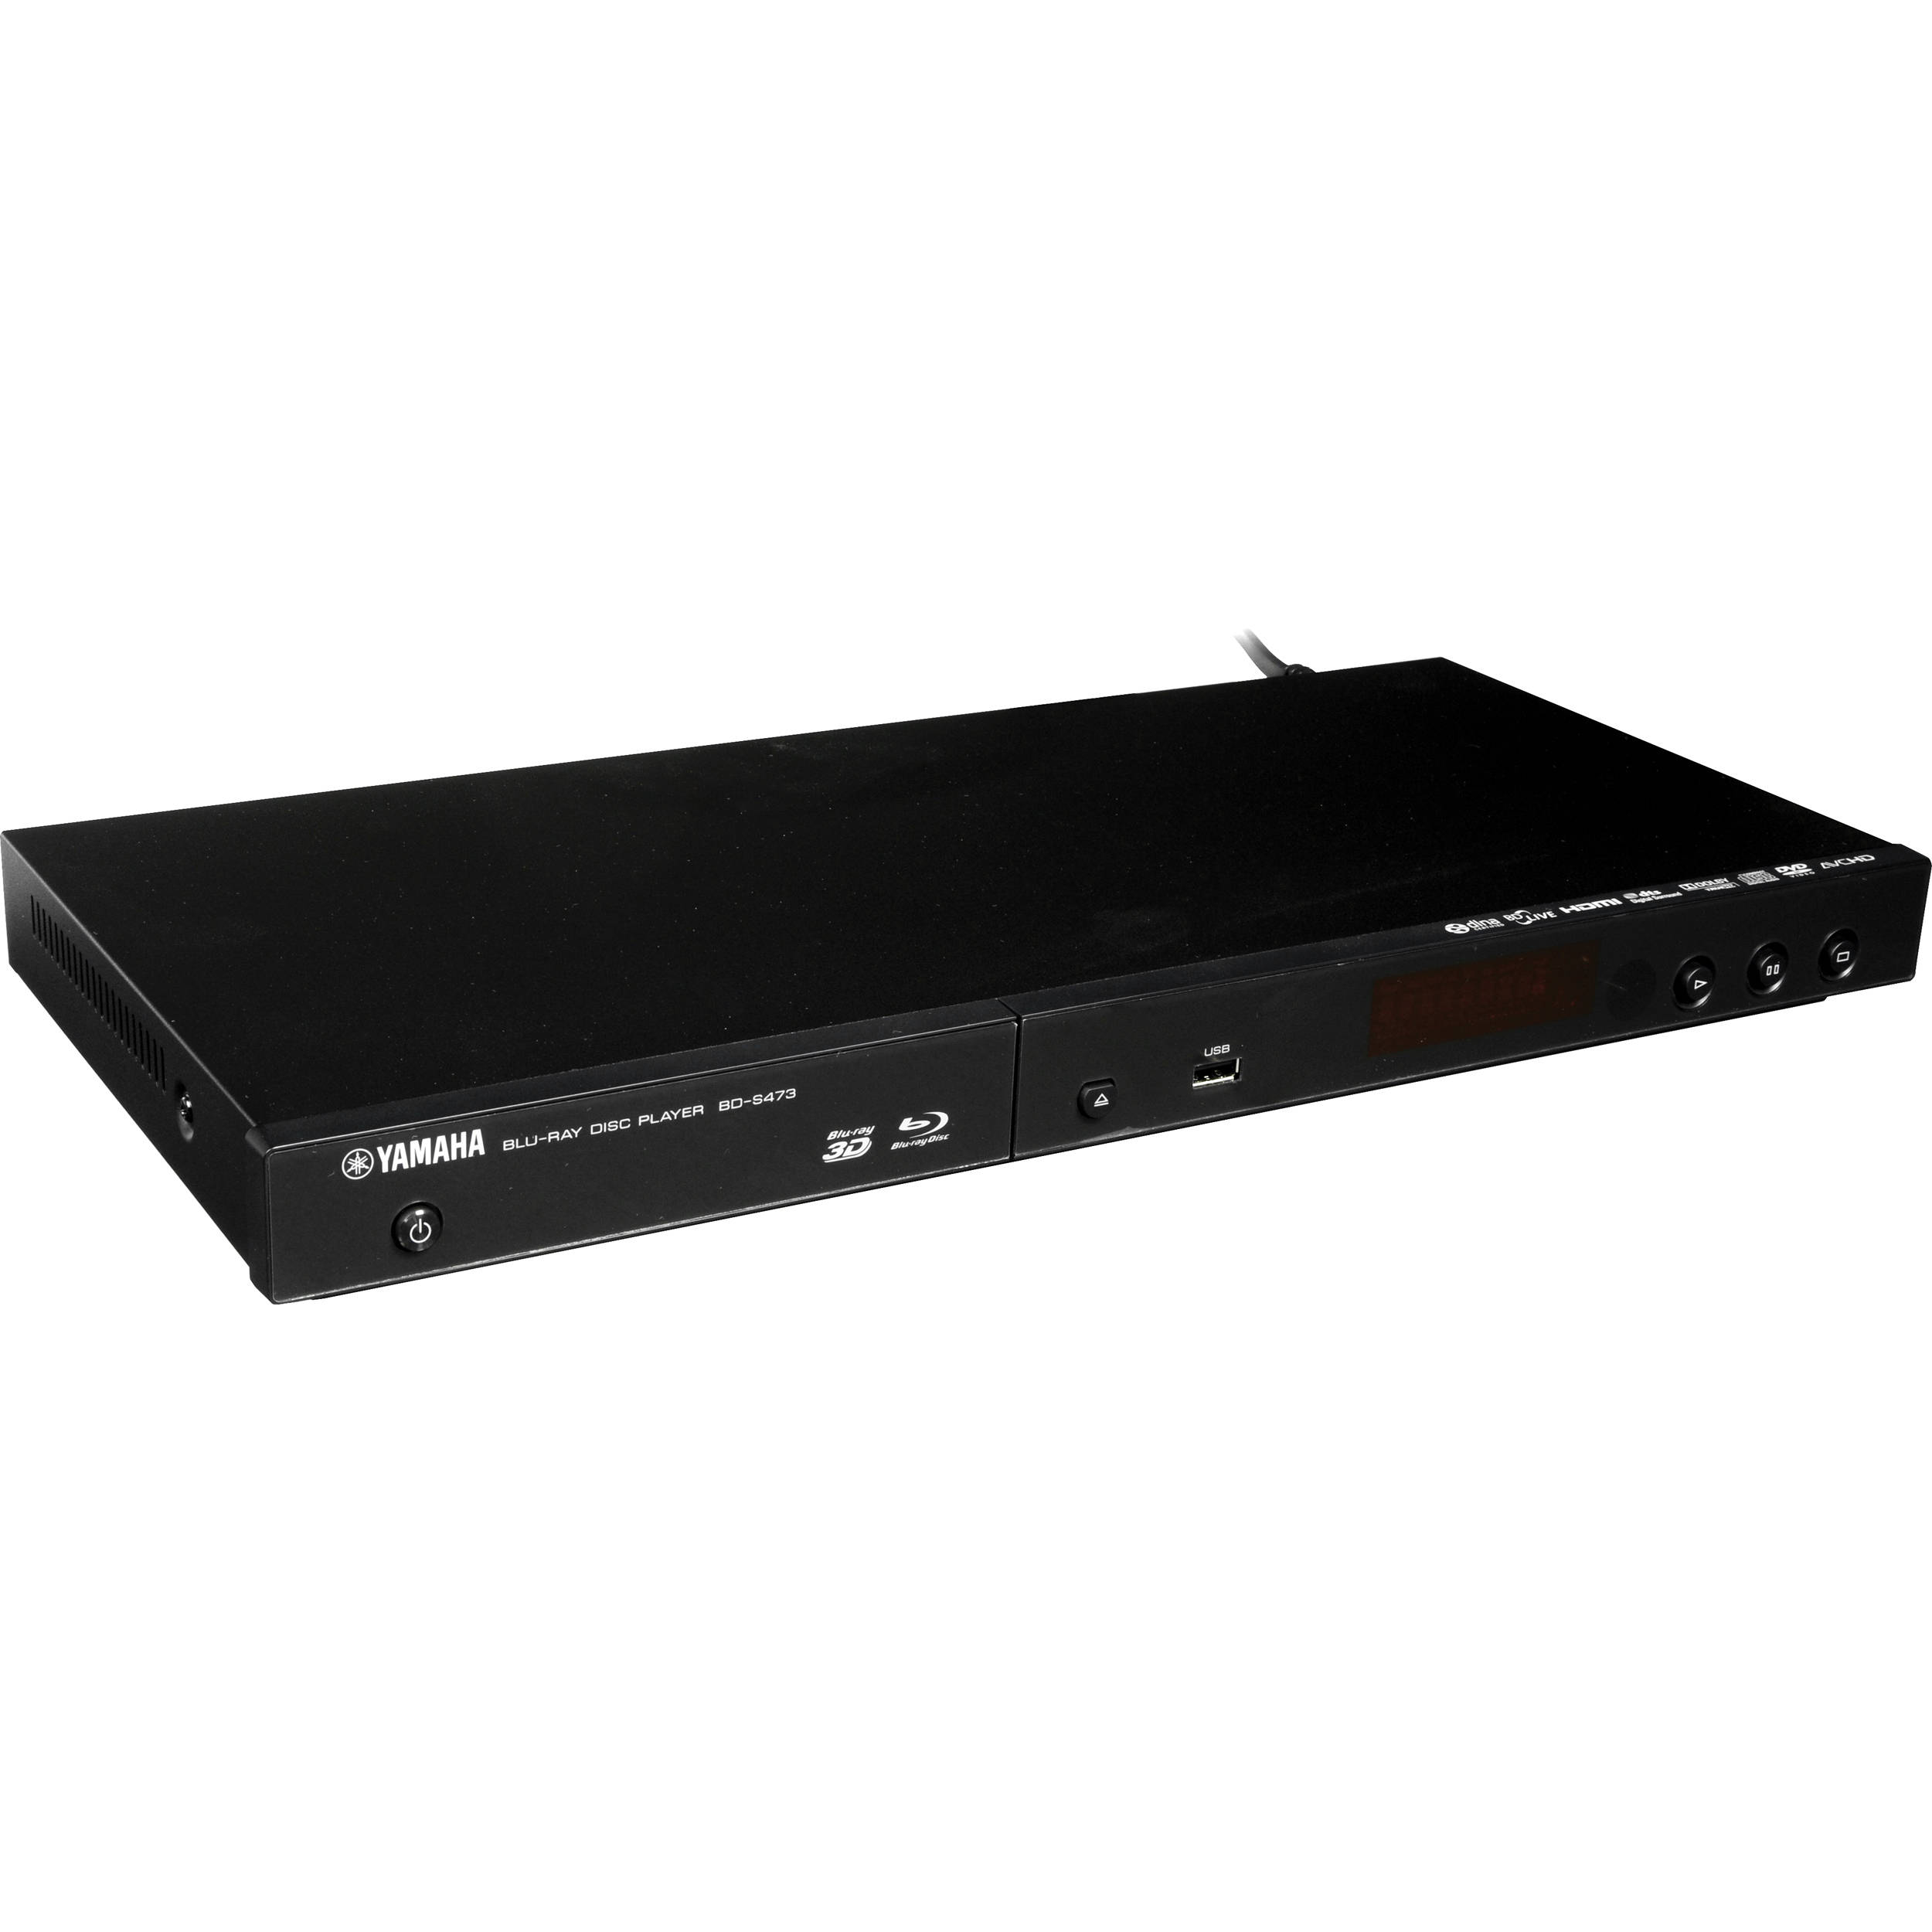 Blue Ray Player Reviews 64